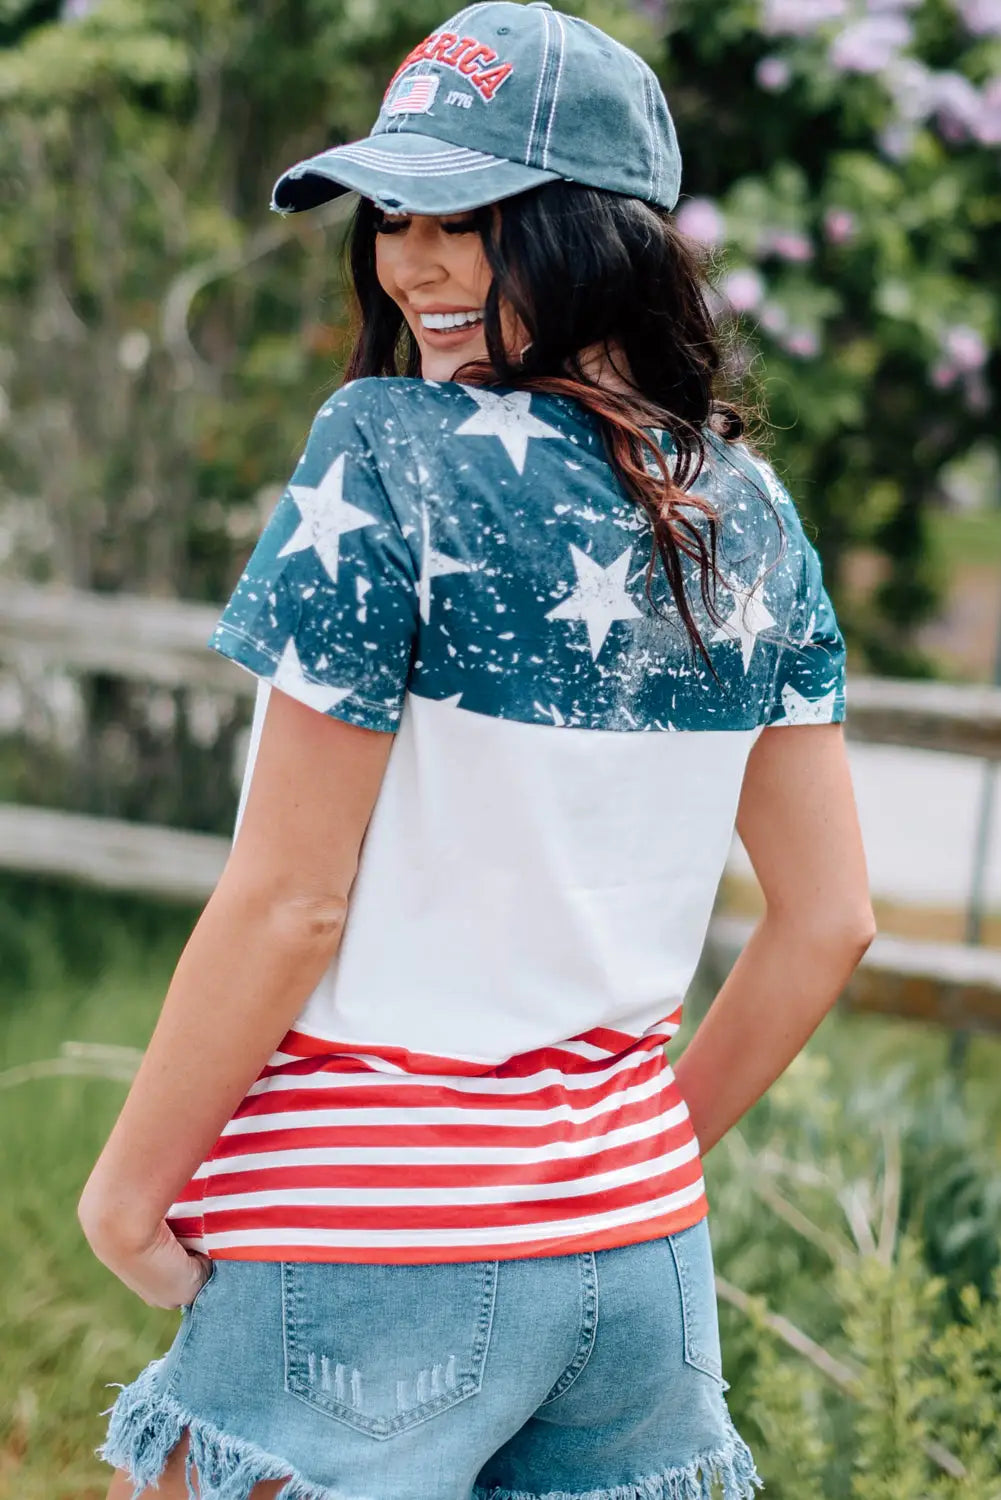 The us stars and stripes inspired top - tops